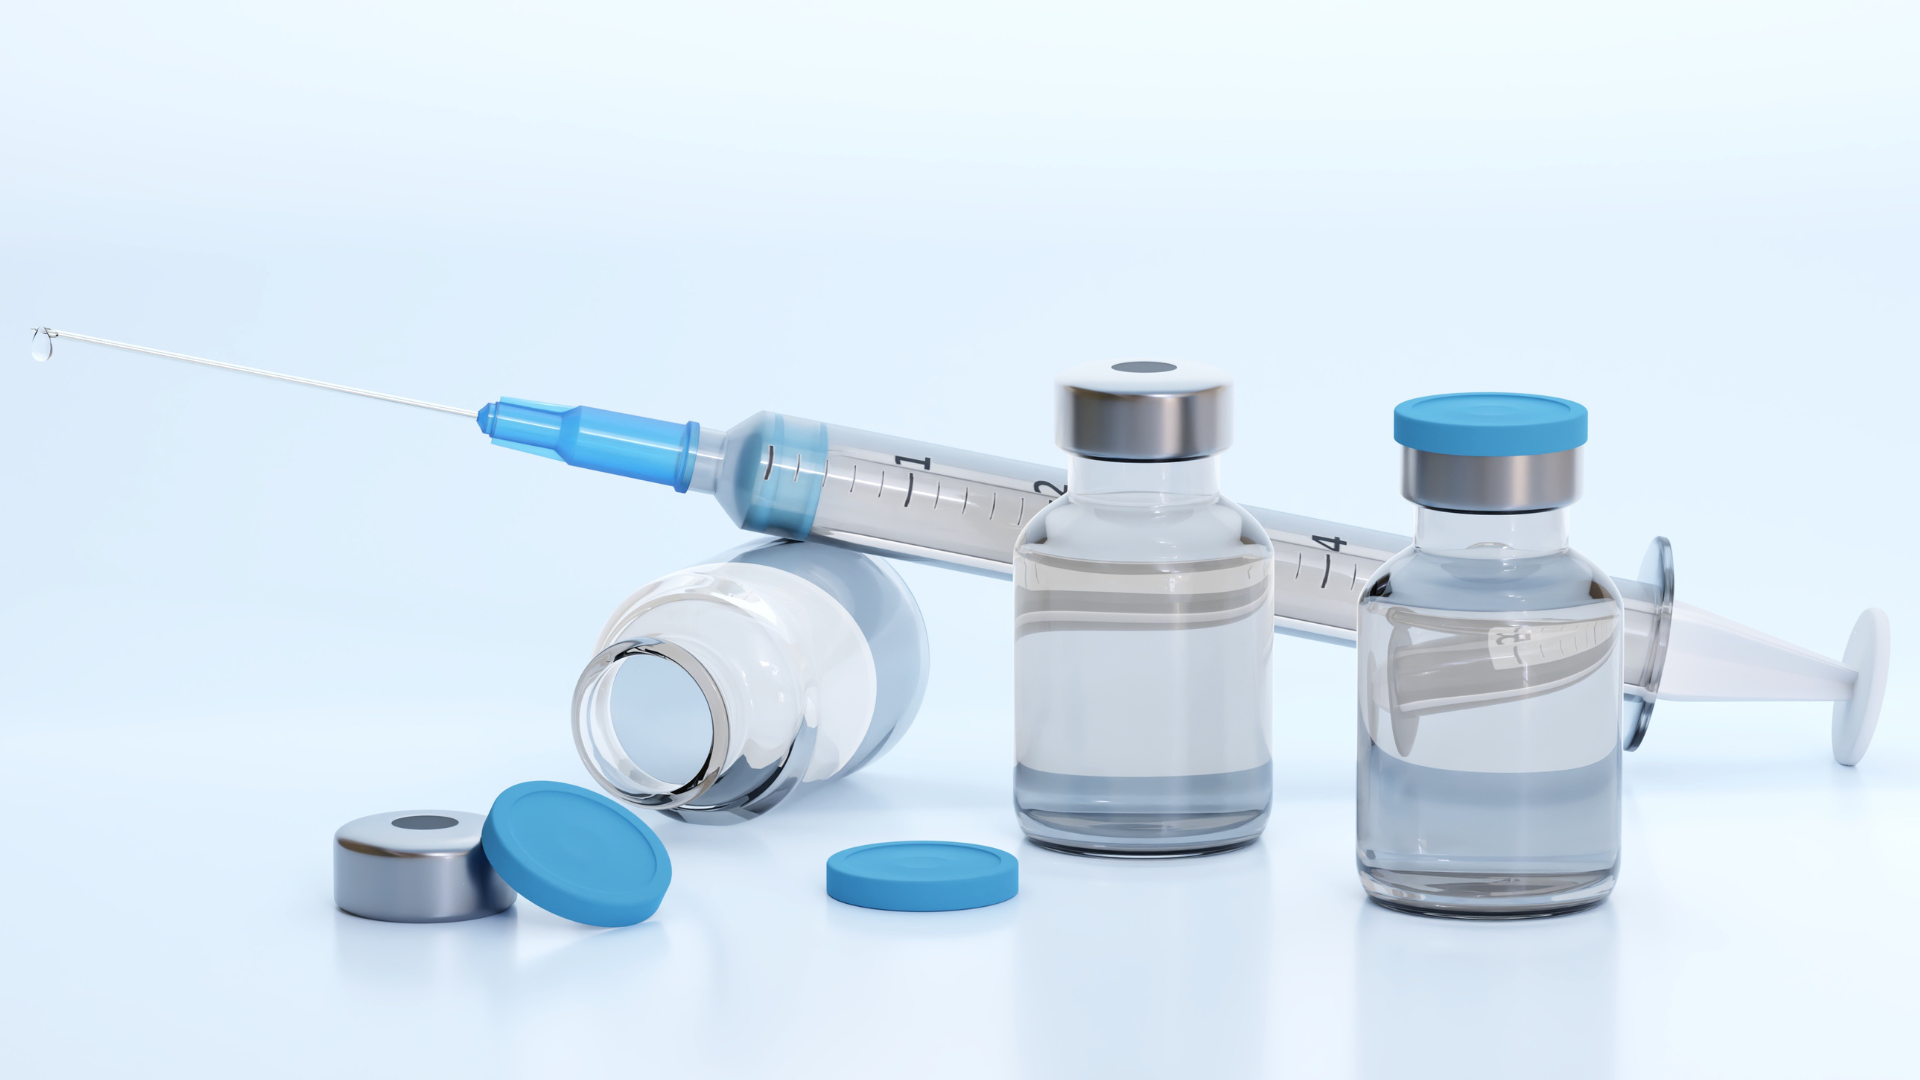 Vaccination tools for medical practices